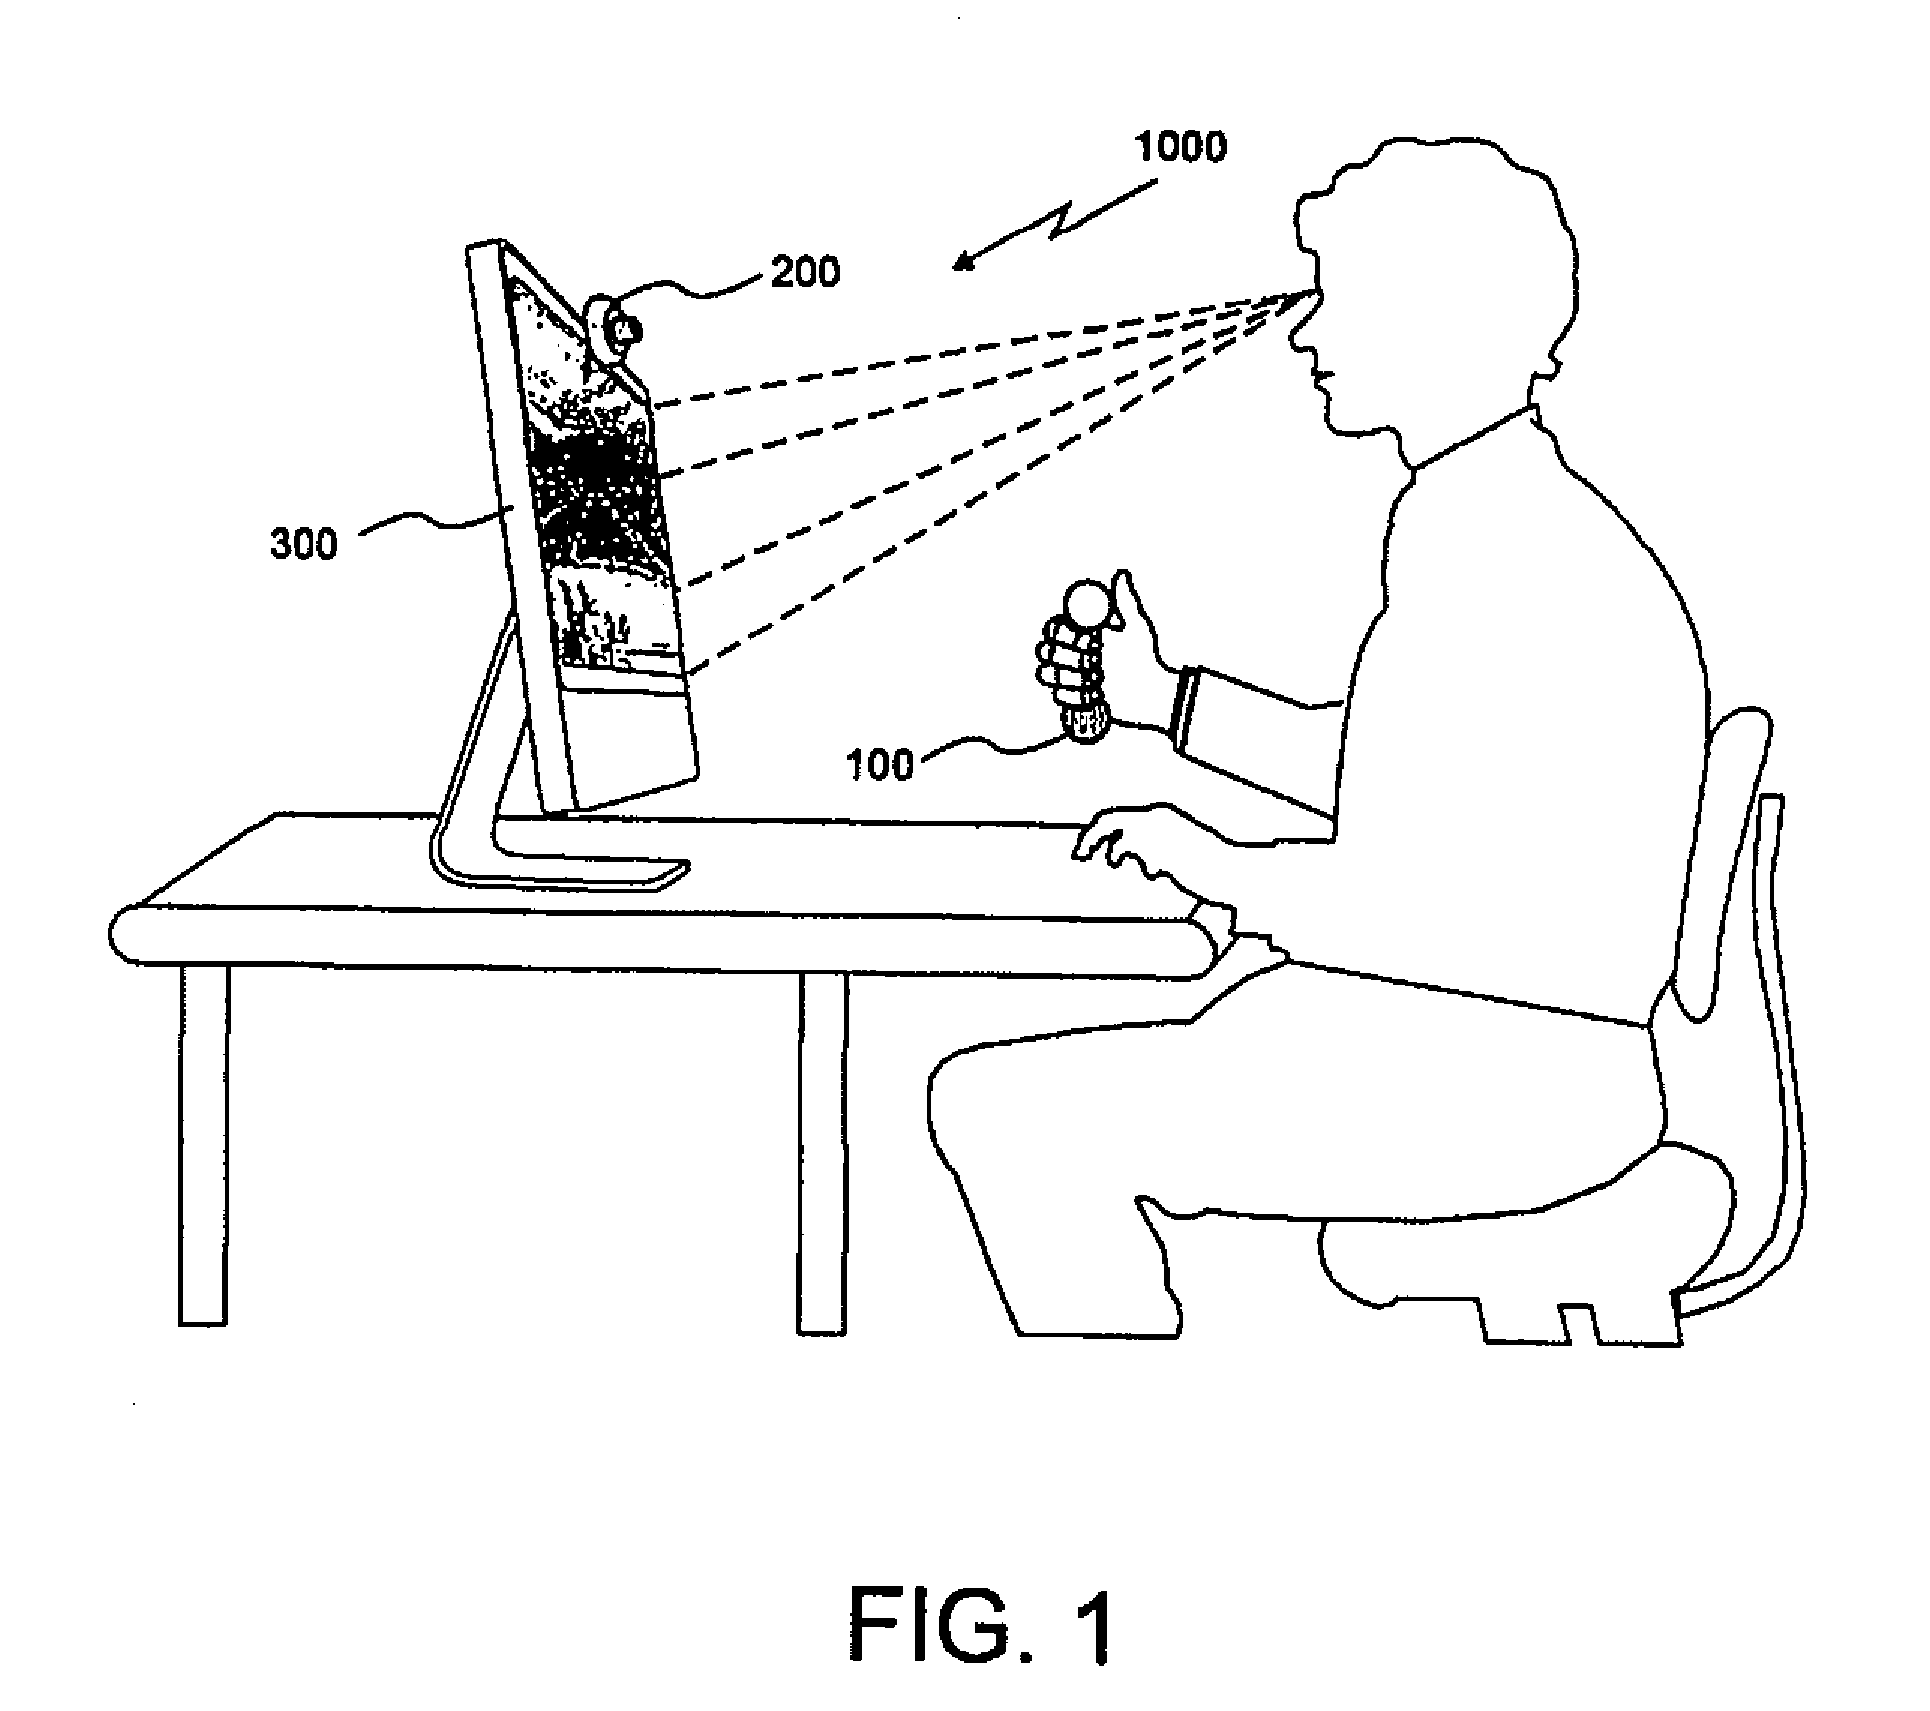 3D monocular visual tracking therapy system for the rehabilitation of human upper limbs